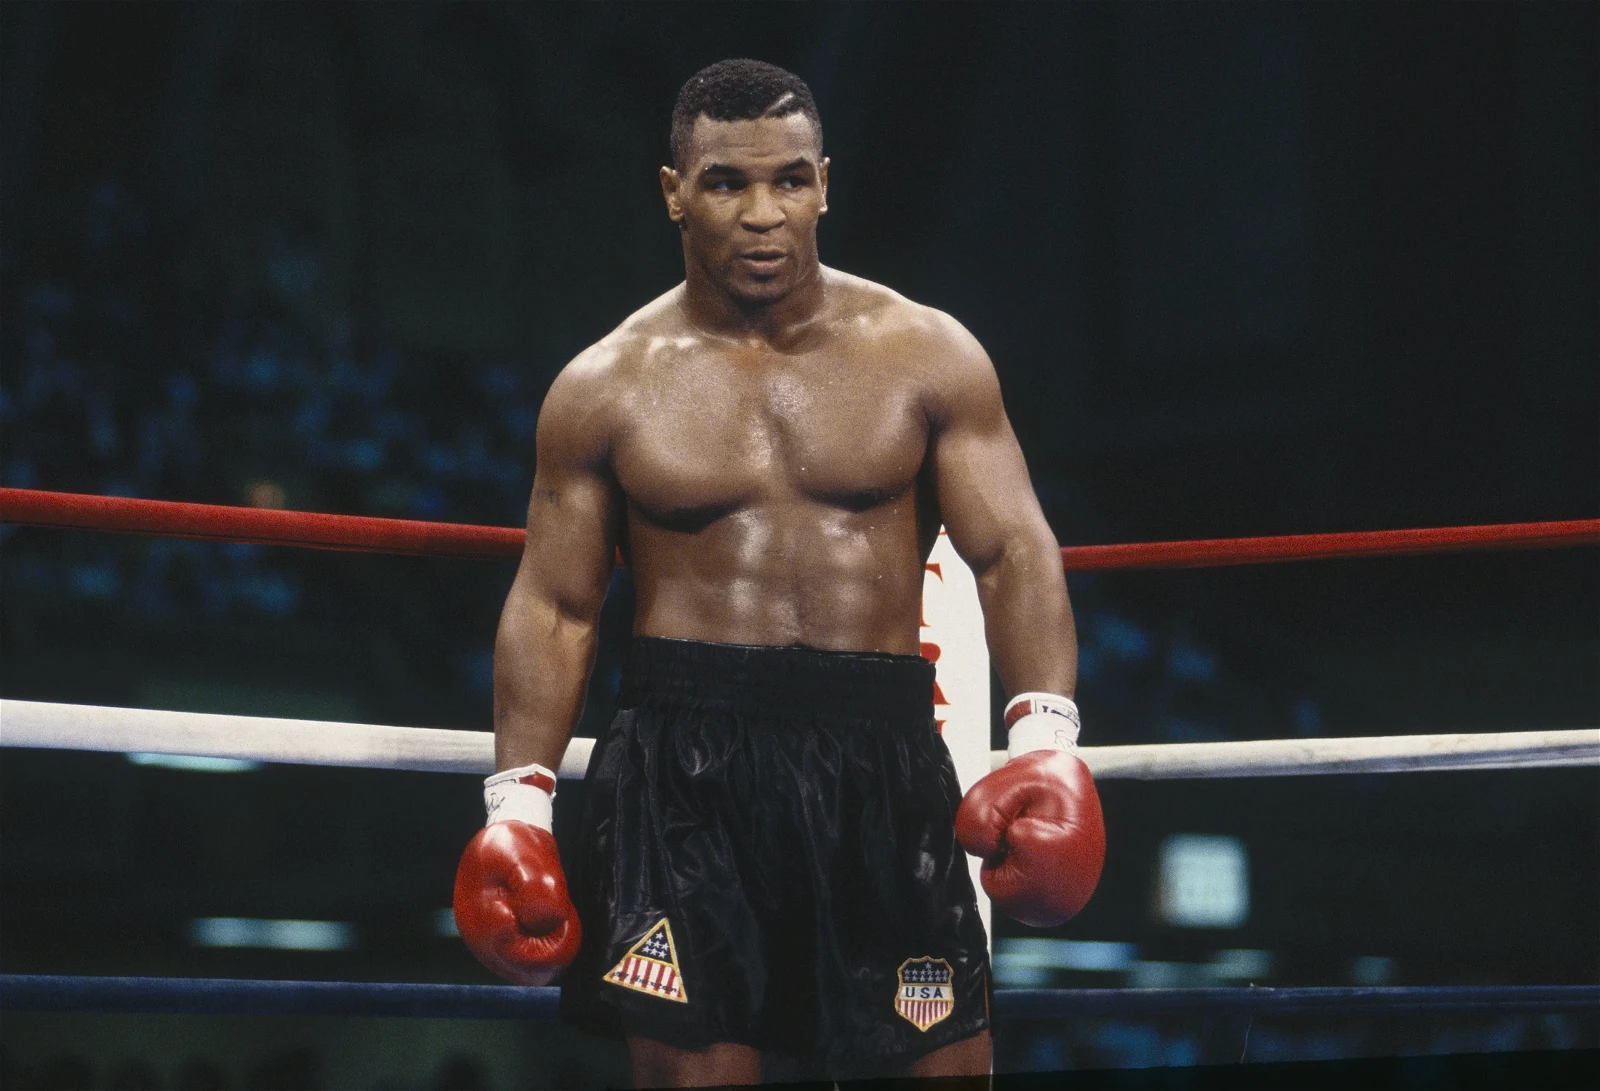 Mike Tyson became a boxing champion by accident